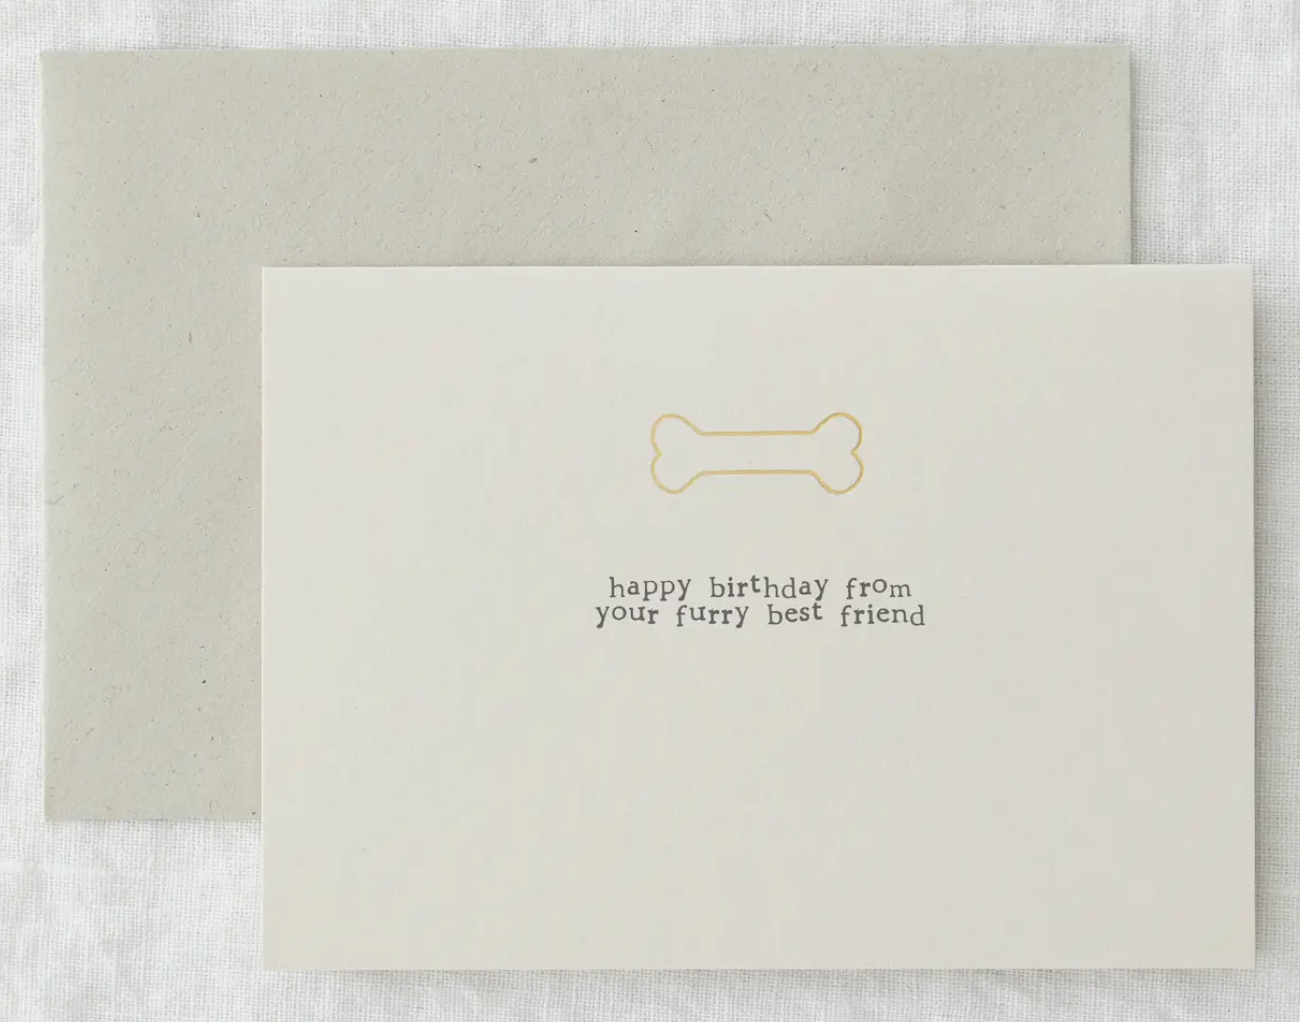 HAPPY BIRTHDAY FROM YOUR FURRY FRIEND CARD